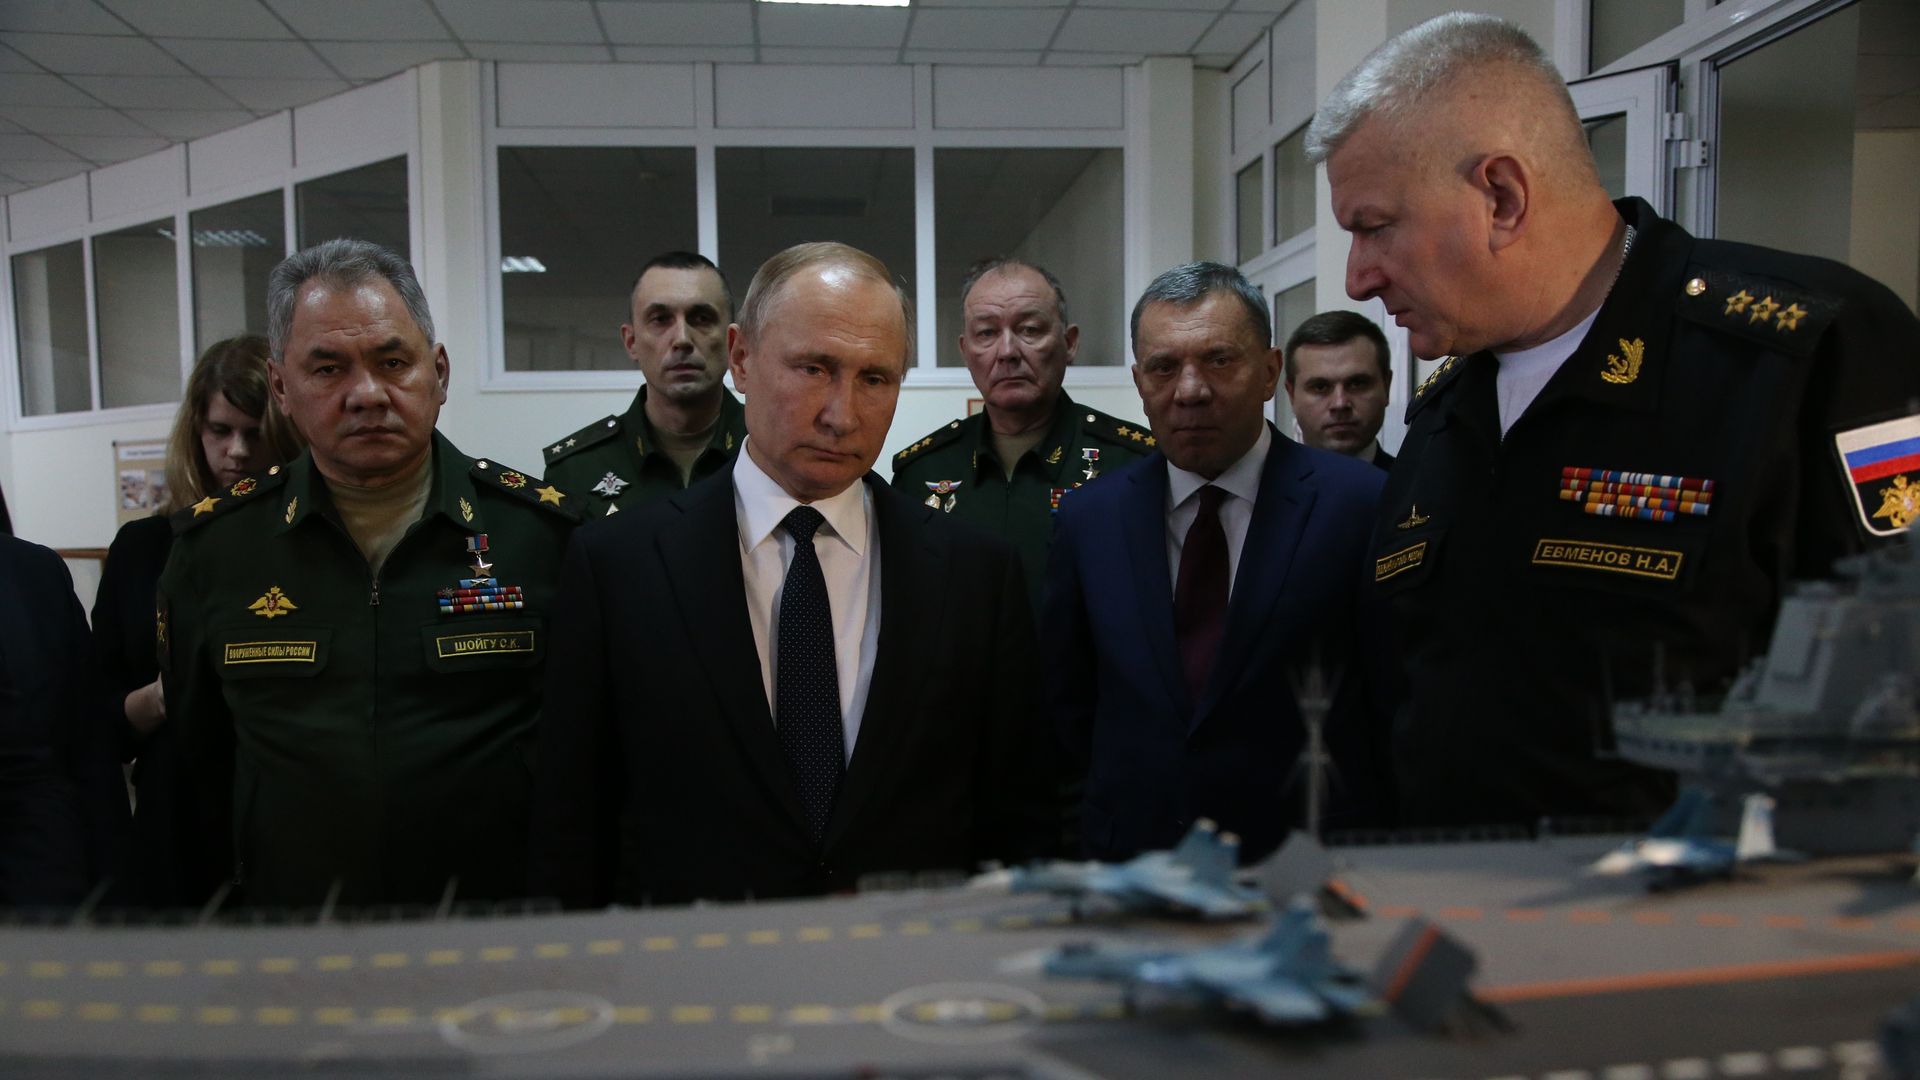 Putin with military officials in Crimea